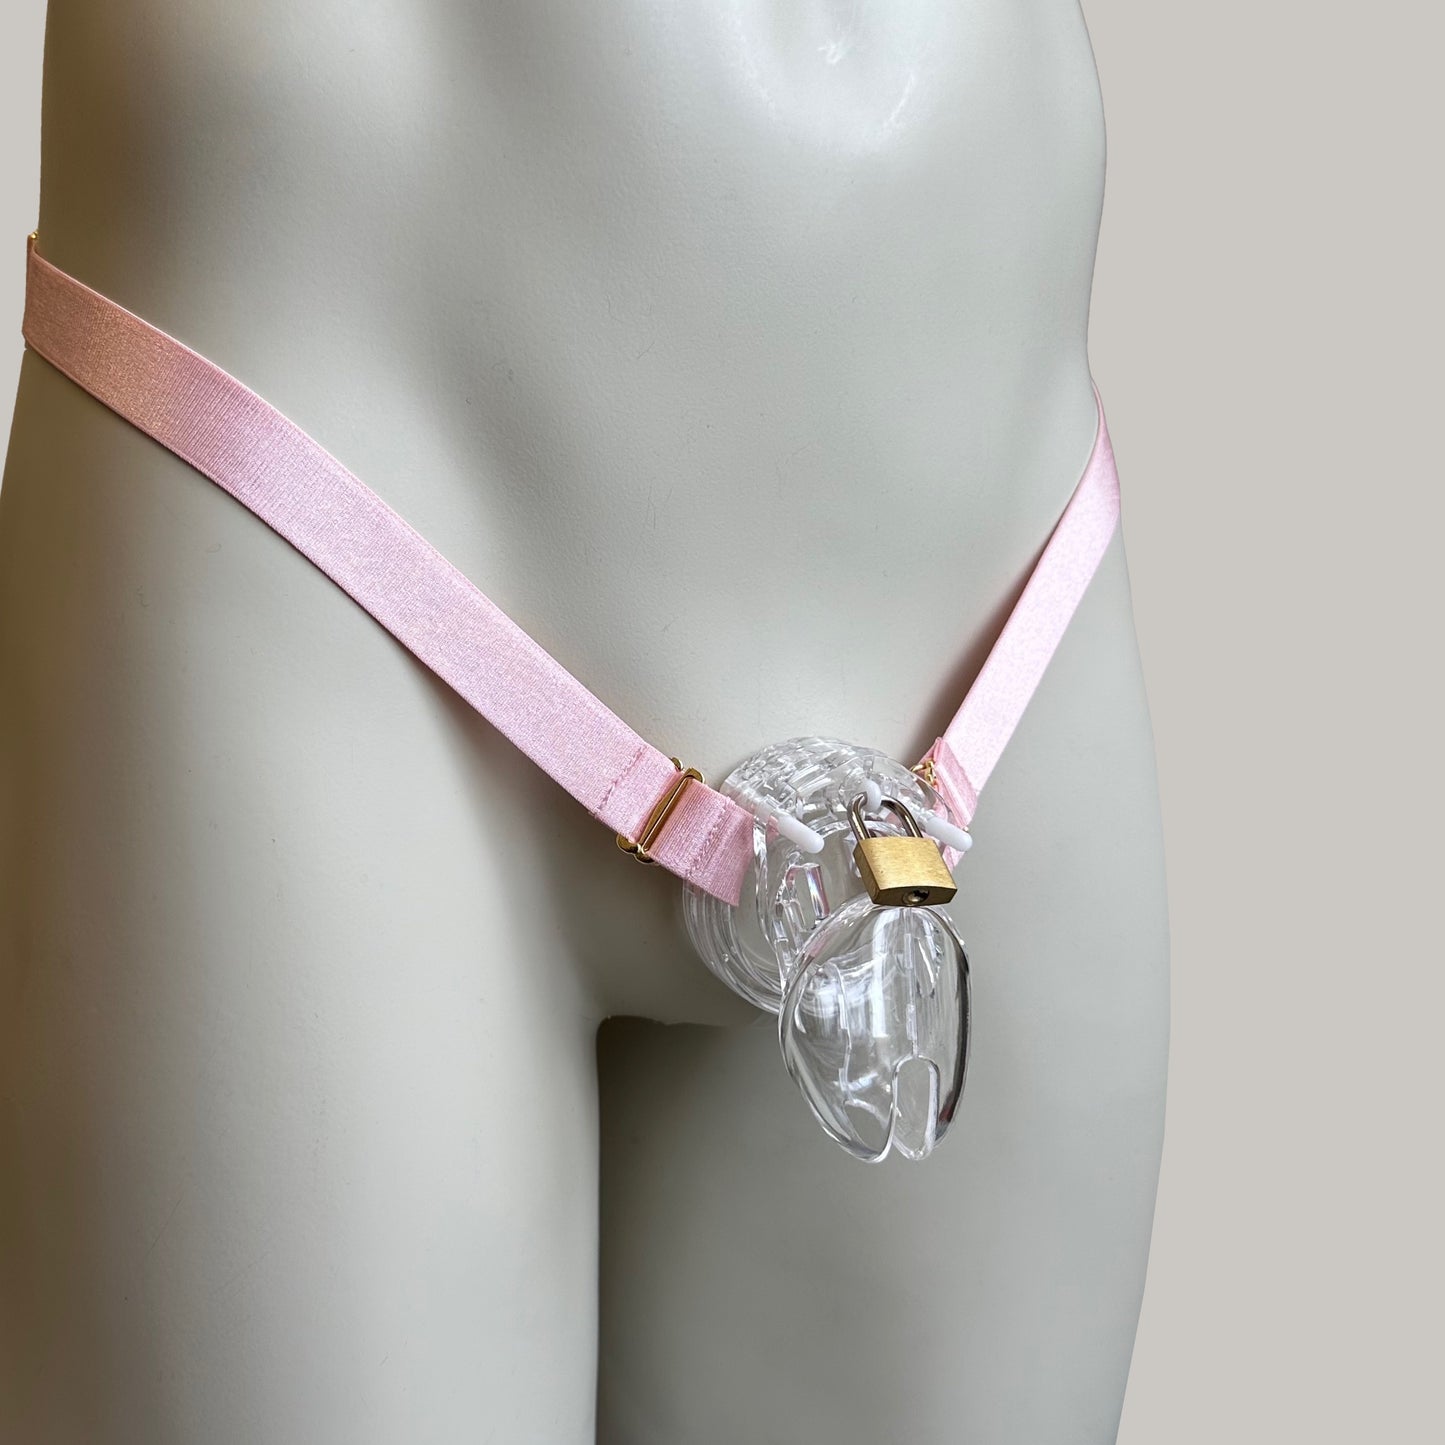 Male Two Strap Chastity Cage Holder Pink